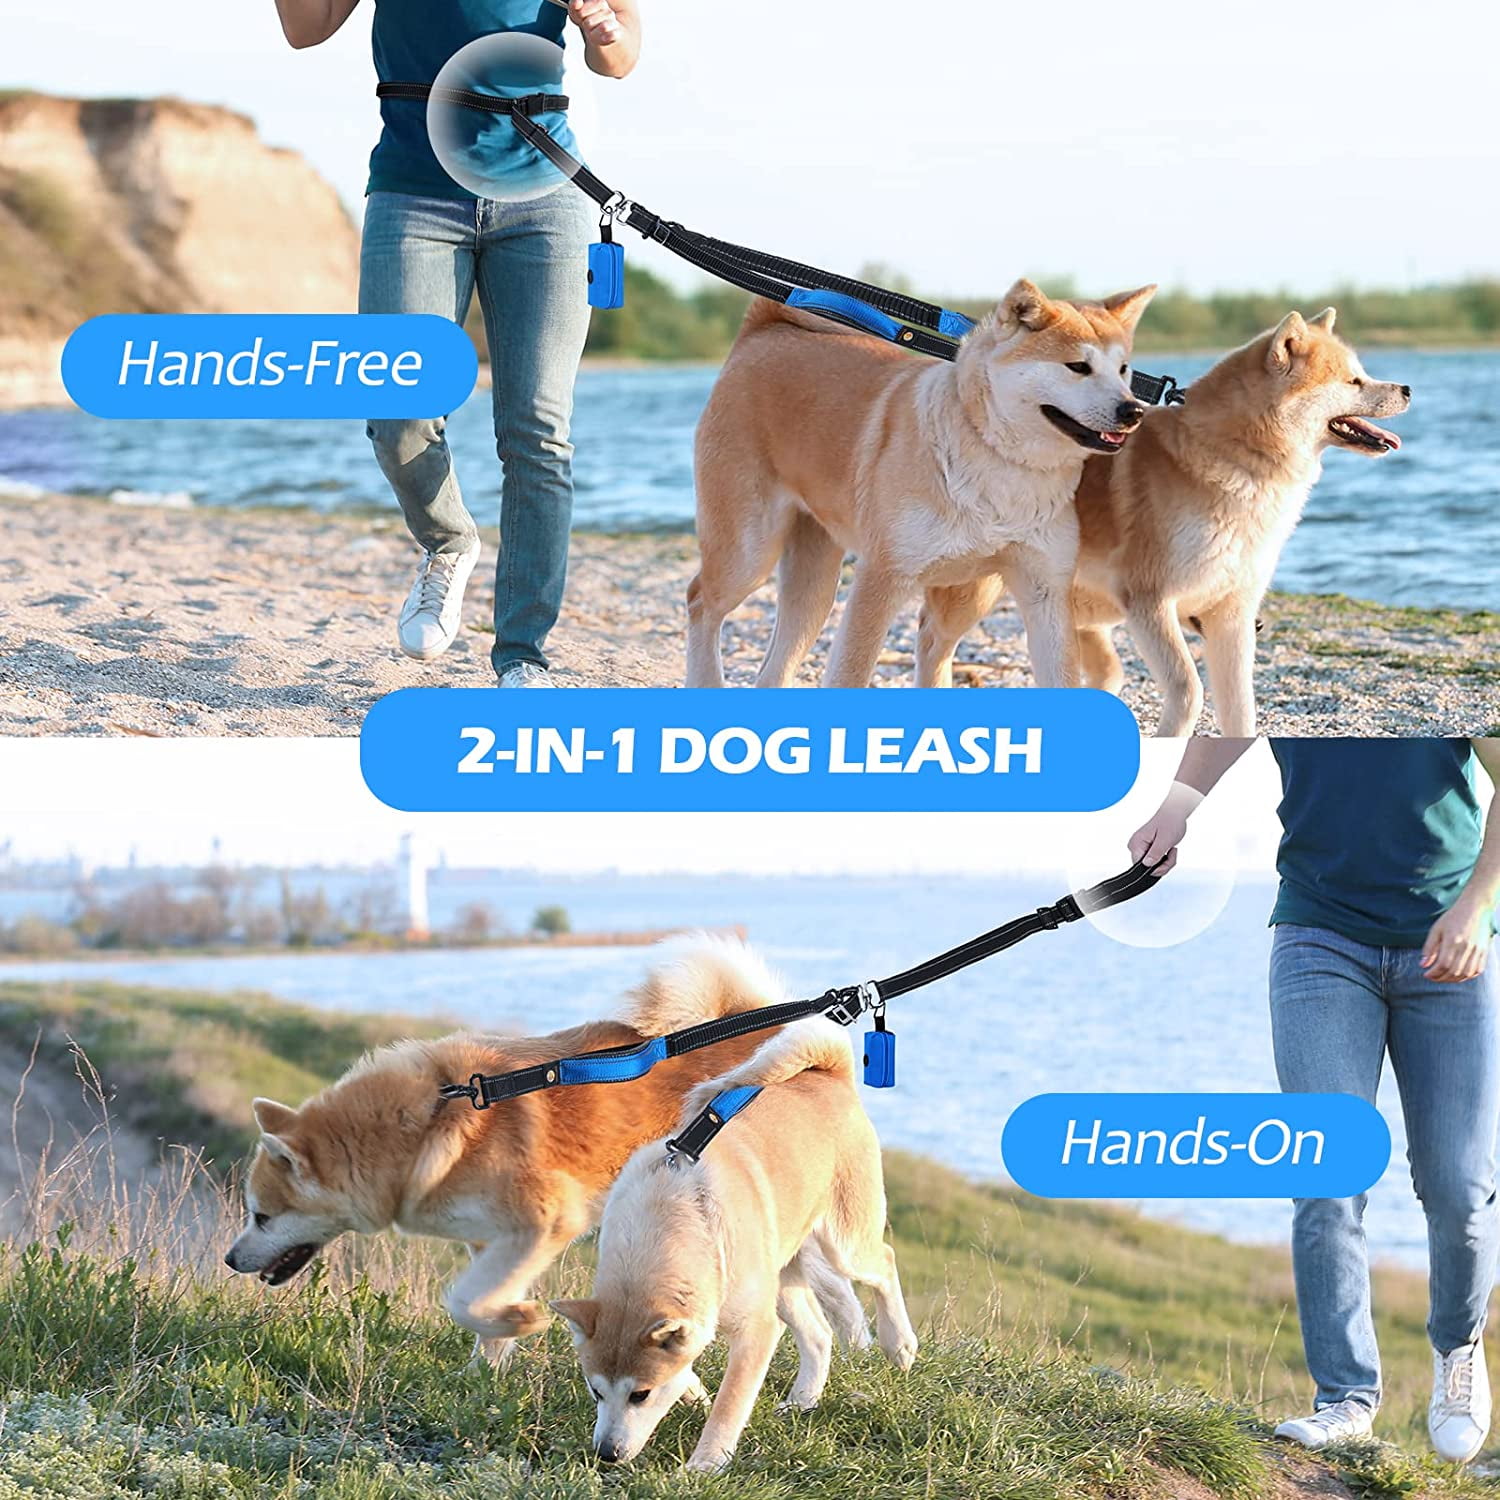 No-Tangle Reflective Leash with Bungee Leash and Padded Handles for Walking Running Training with Medium and Large Dogs with Poop Bag Holder Hands Free Double Dog Leash Adjustable Waist Belt 